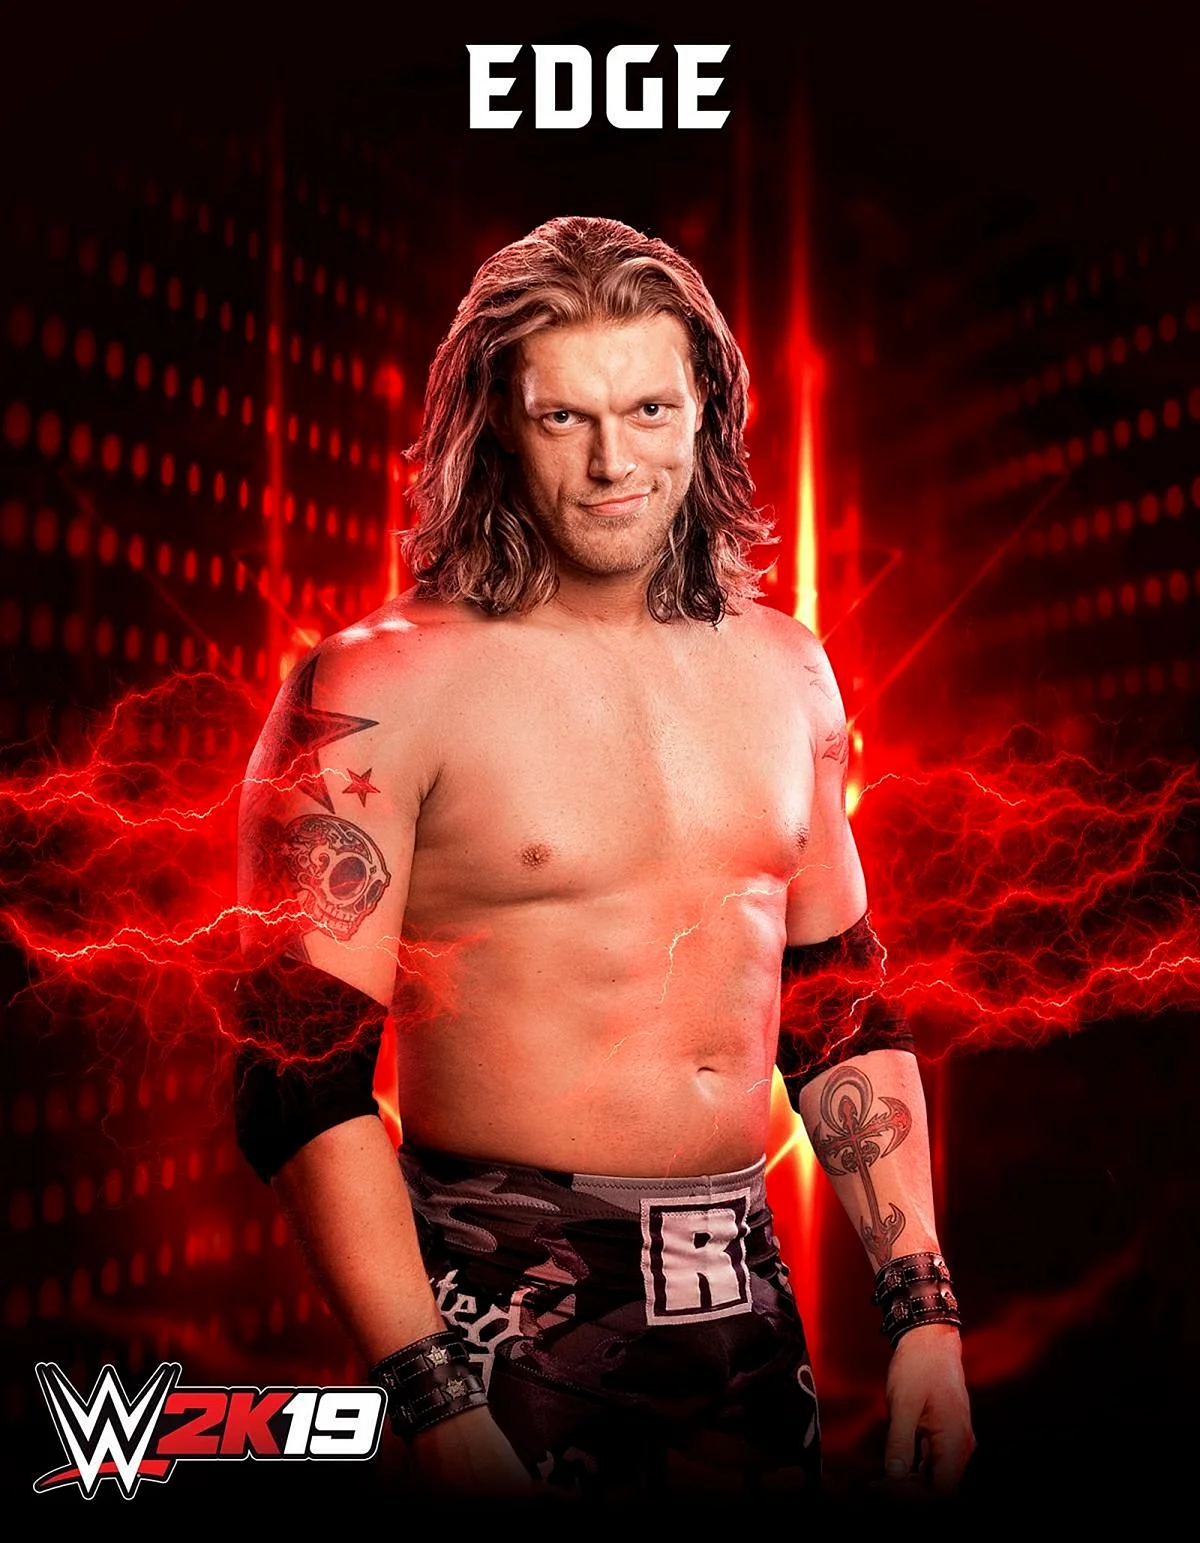 Wwe 2k19 Wallpaper For iPhone